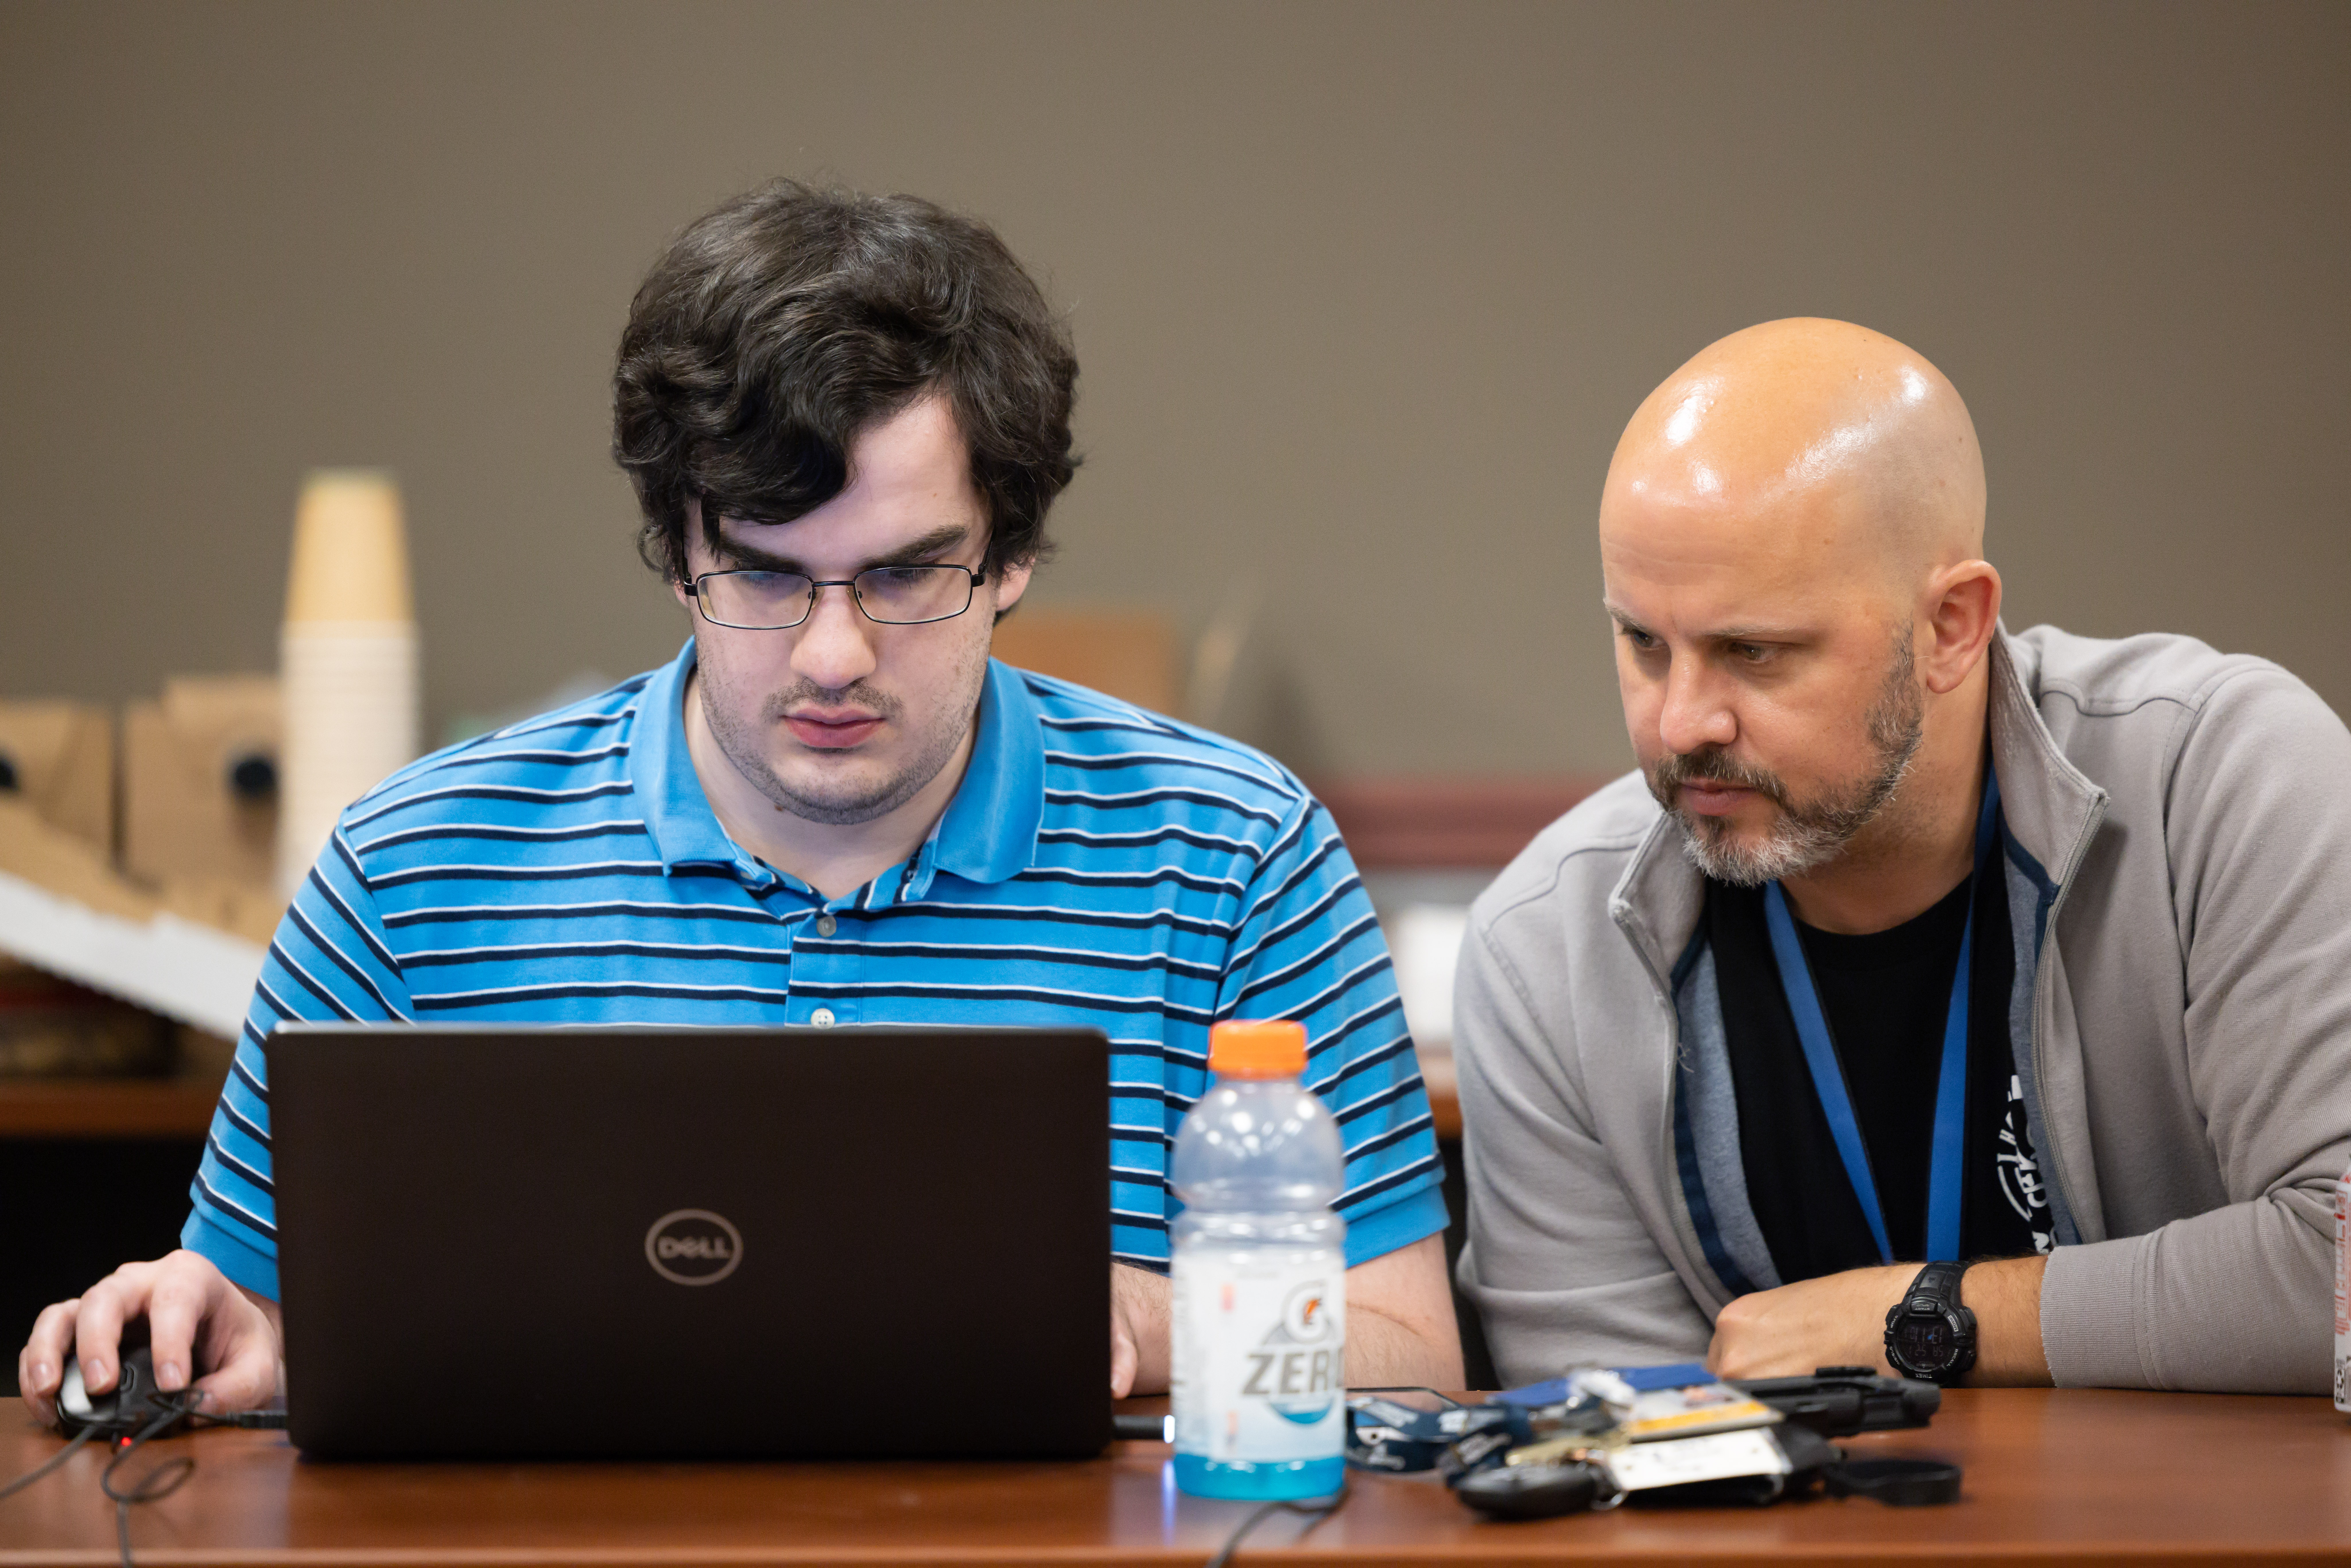 GTRI Principal Research Engineer Chris Roberts helps a student during a hackathon competition.